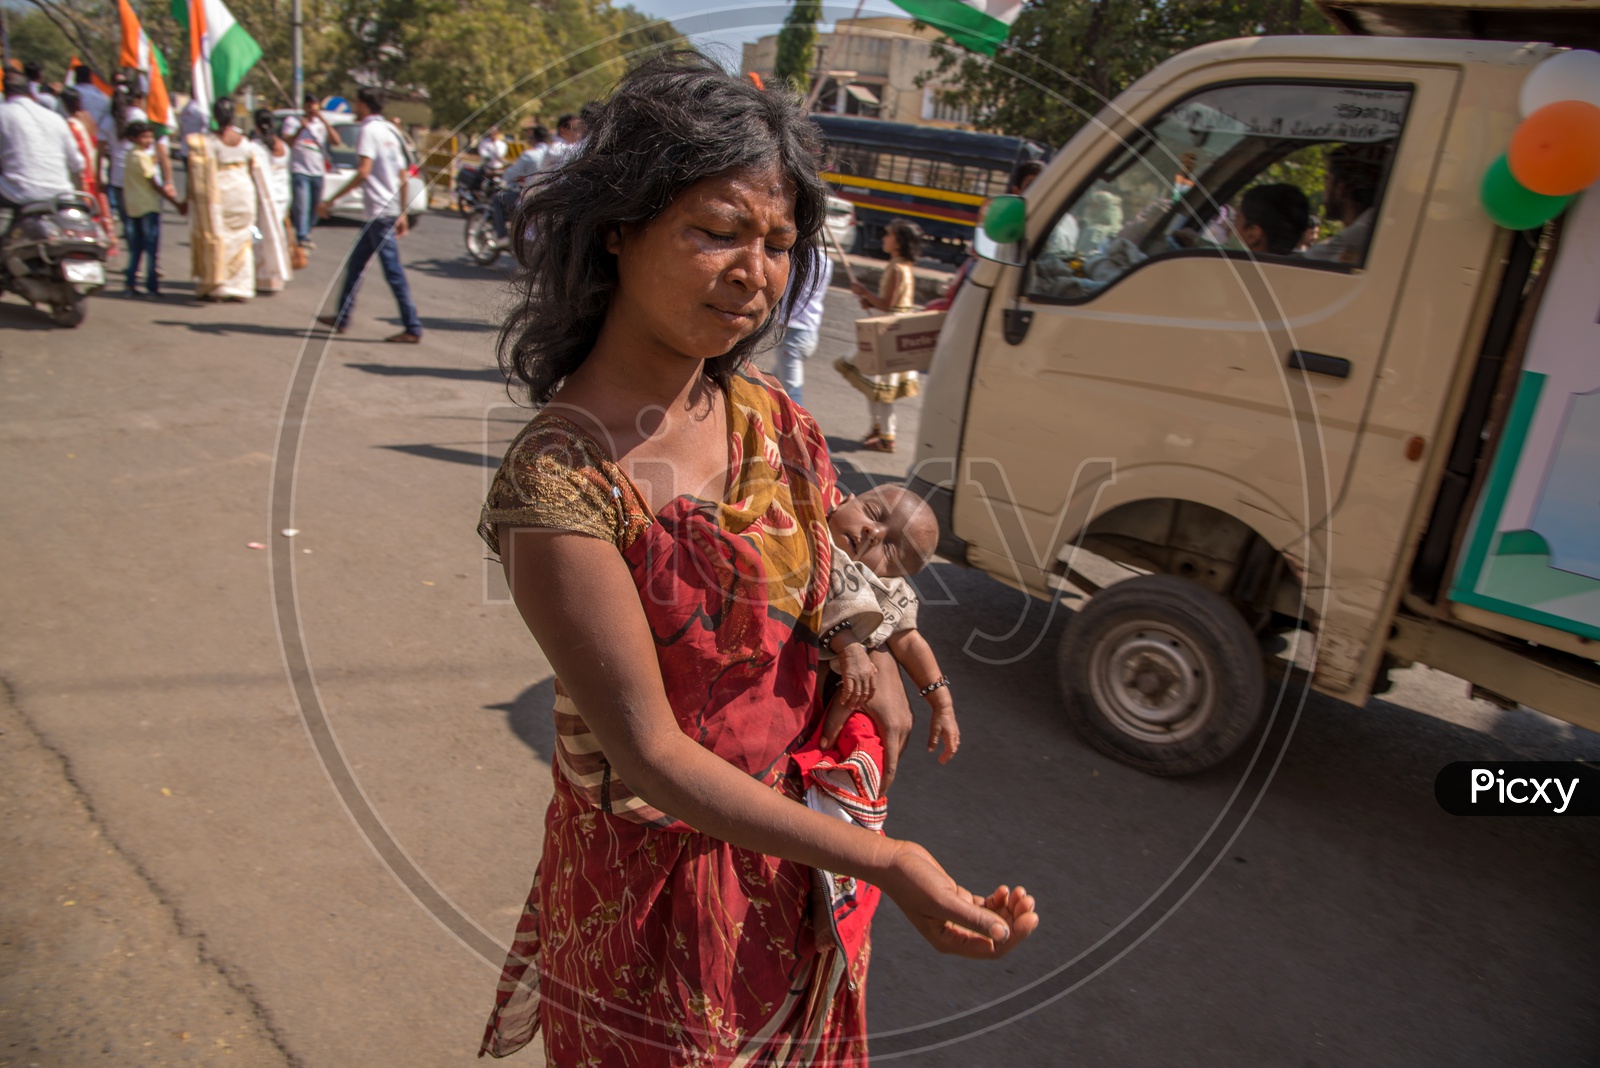 A Woman Beggar Along With a Child in her Arms  On the Streets Of India